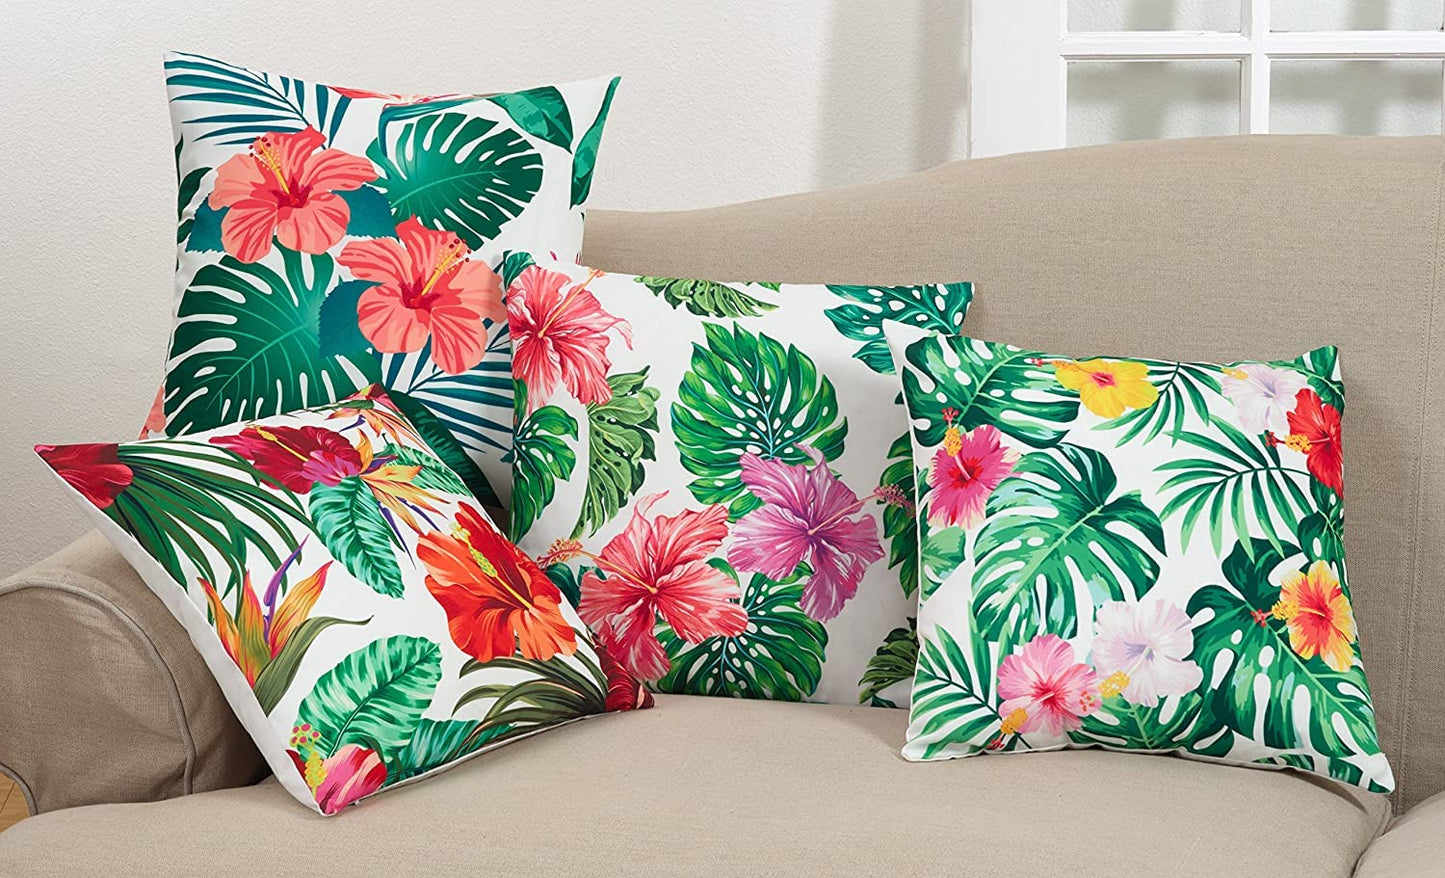 Fennco Styles Monstera Hibiscus Poly Filled Decorative Throw Pillow 18" W x 18" L - Multicolored Tropical Cushion for Home, Indoor Outdoor, Living Room, Couch, Bedroom and Office Décor